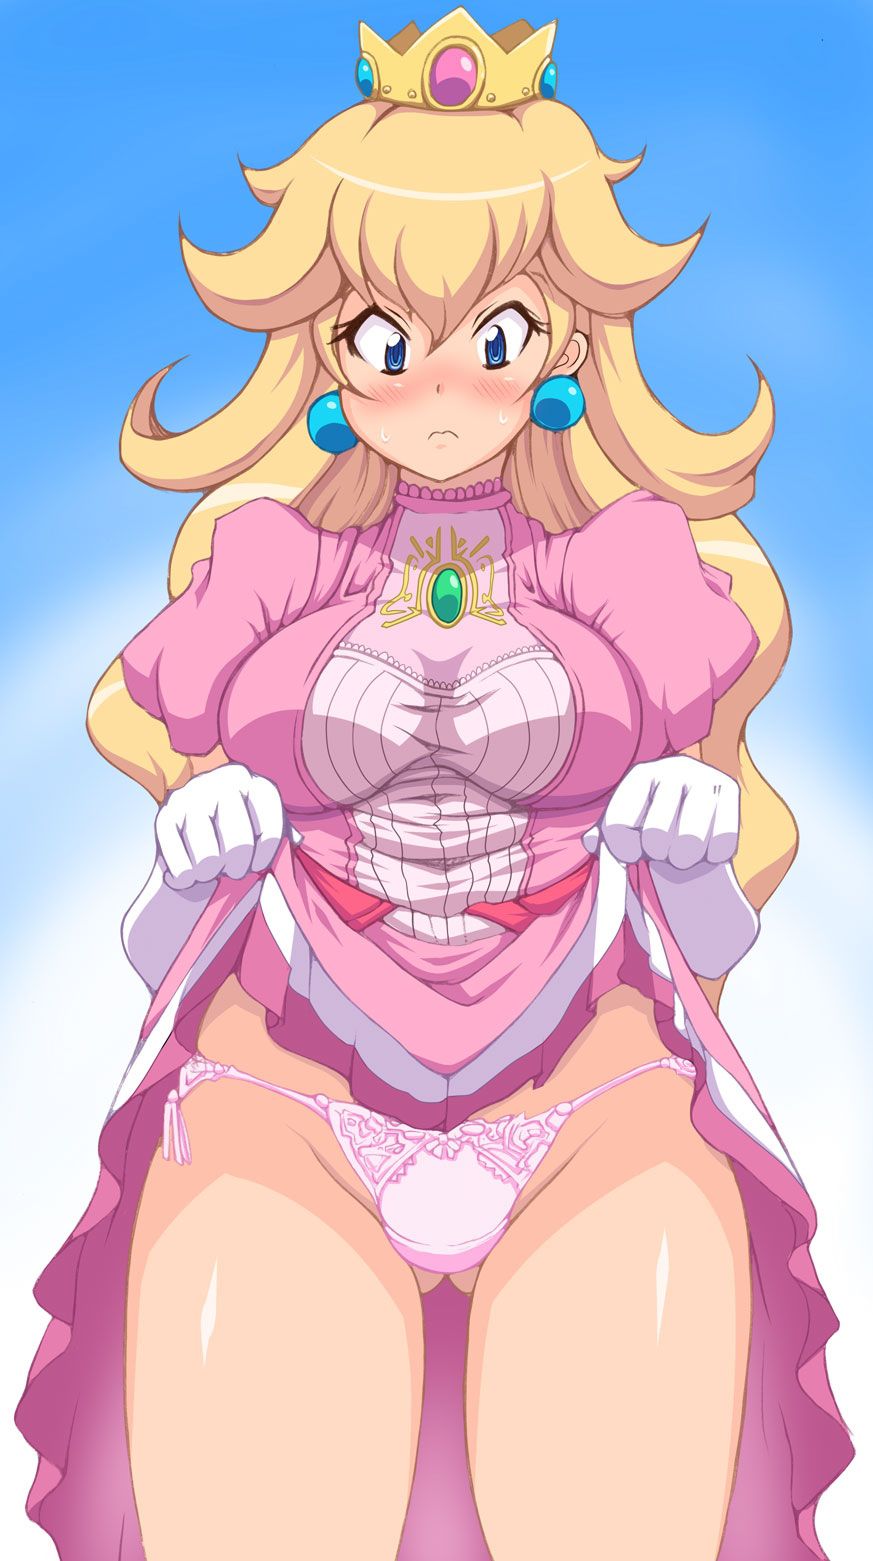 [Secondary] erotic image of the rare Princess Peach that is abducted willingly every time the violent sex of Bowser is not forgotten 62